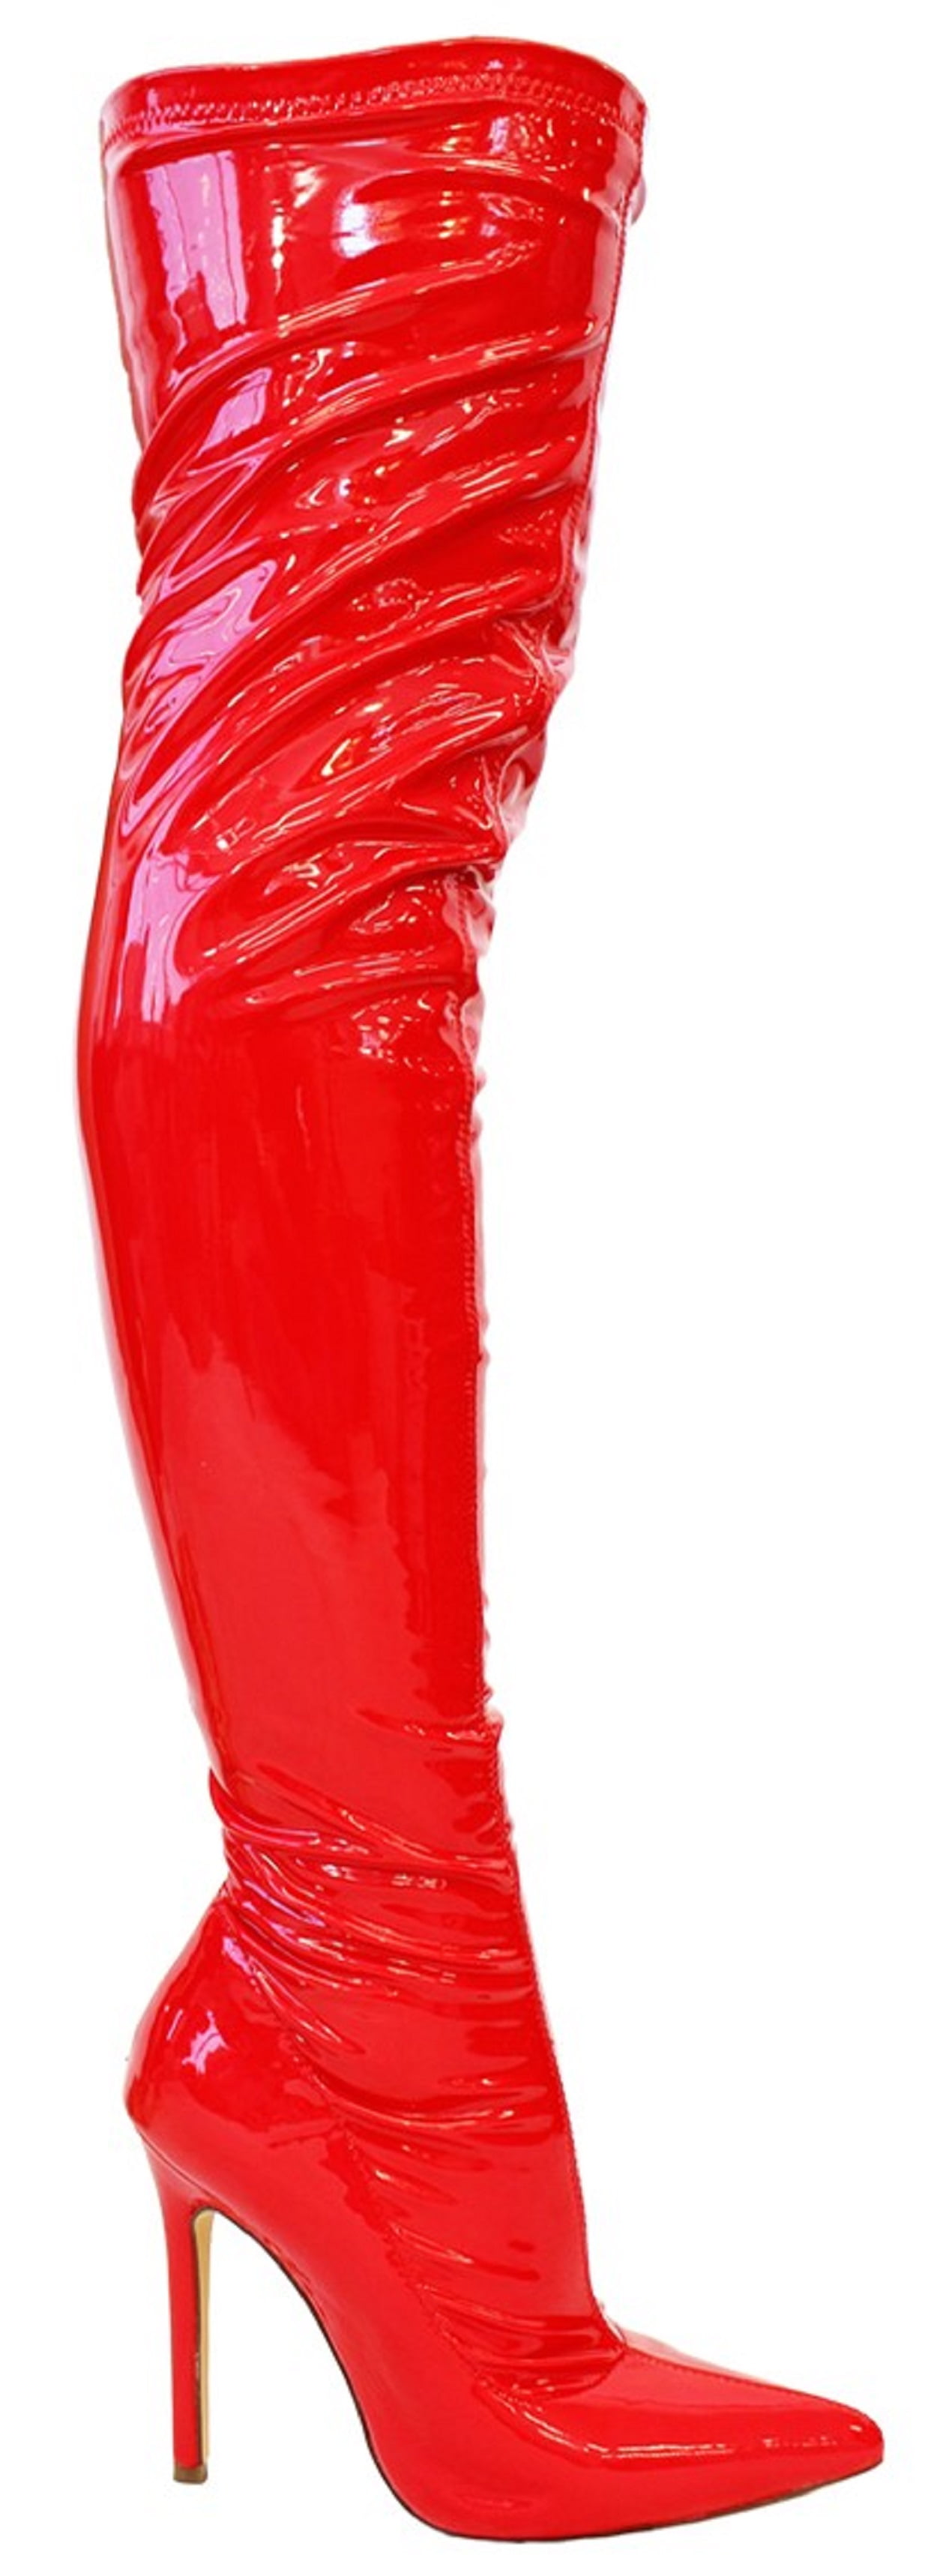 Womens Warm Over Knee High Stiletto Heel Boots Pointed Toe Patent Leather Shoes 